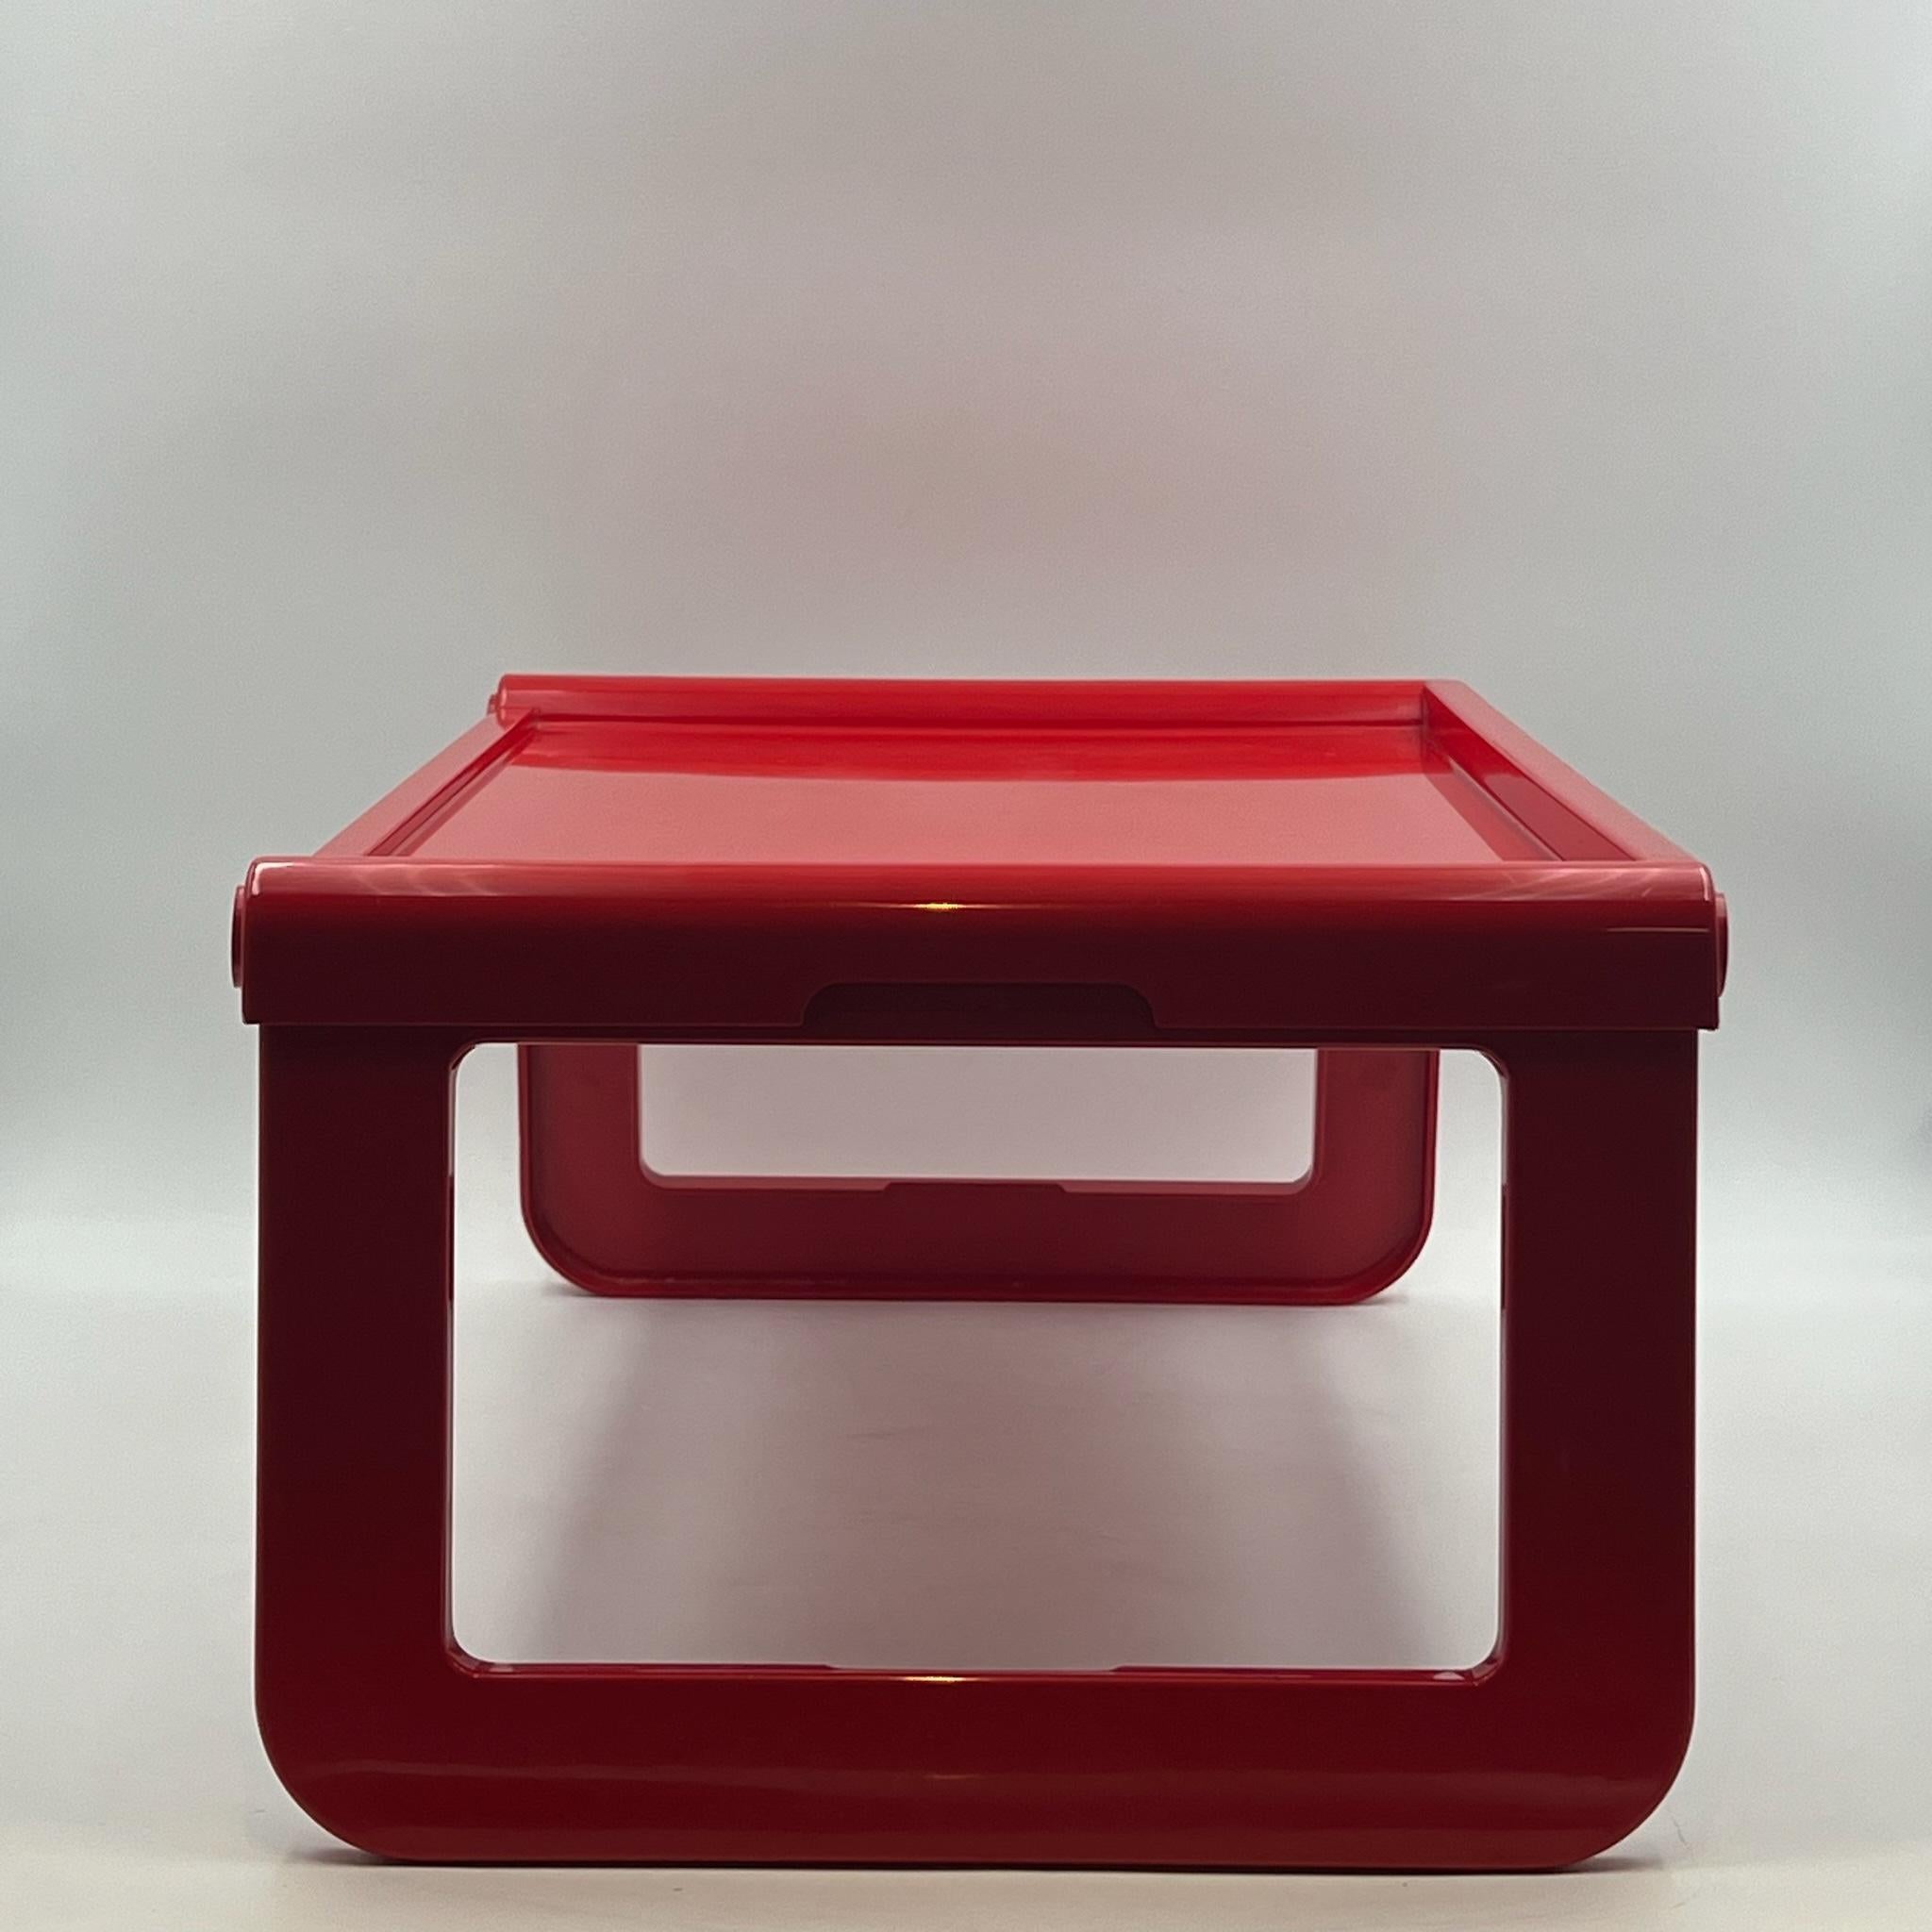 Italian Iconic Tray Table 'Jolly' by Luigi Massoni for Guzzini in Glossy Red , 1970s For Sale